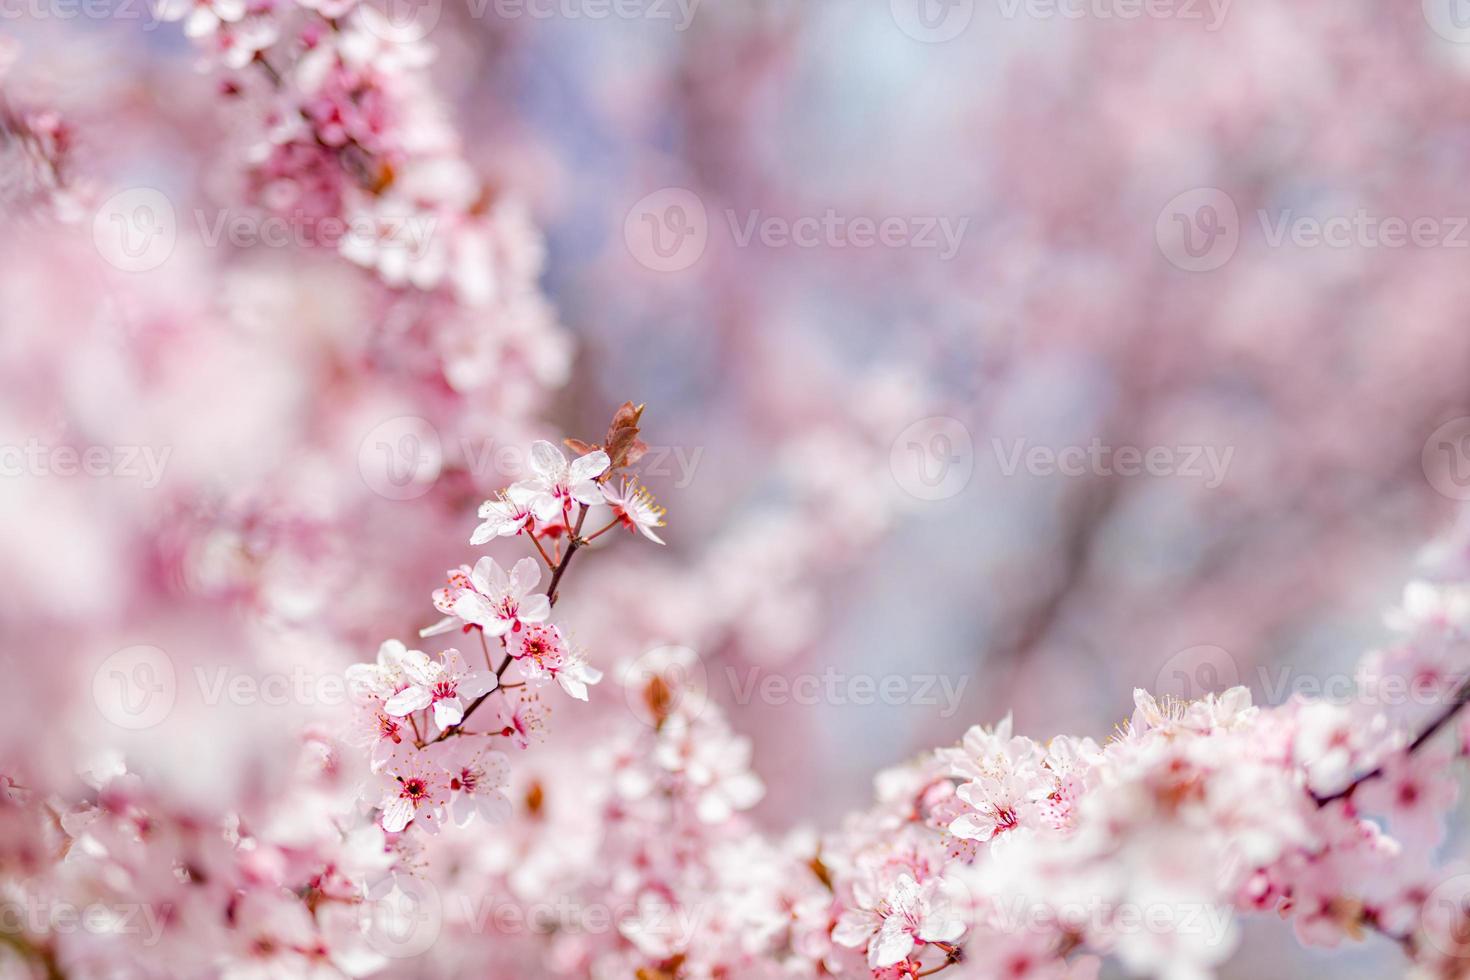 Spring romantic blossoms. Amazing nature scene with blooming tree and sunny view. Sunny day. Spring beauty floral closeup artistic abstract blurred background. Springtime nature photo